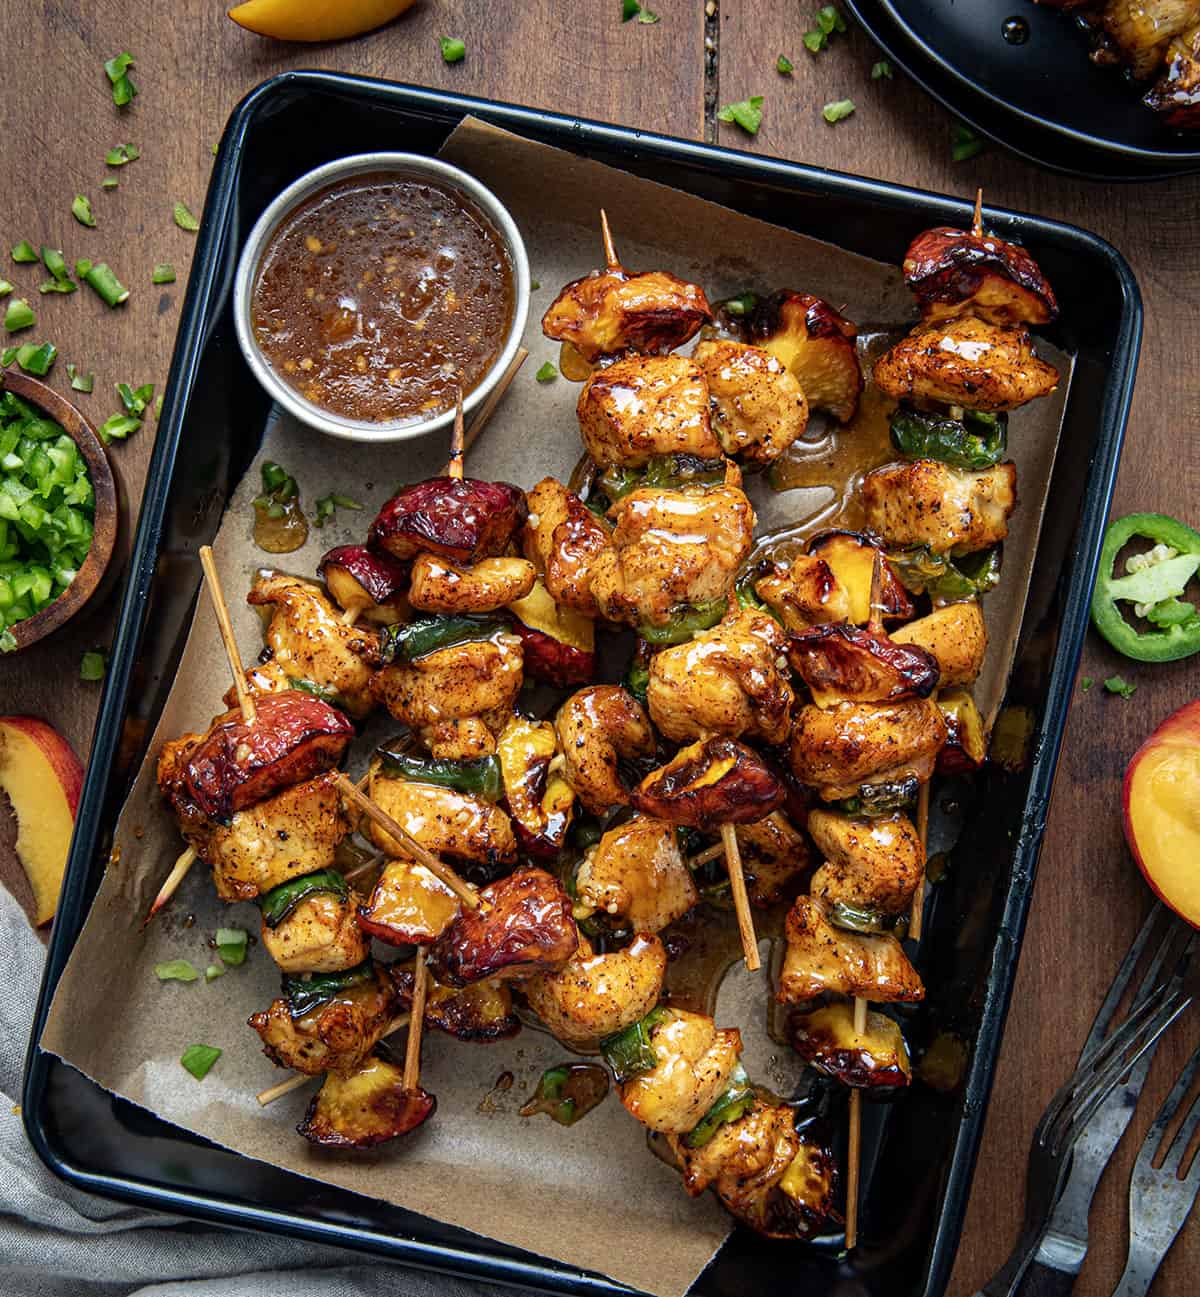 Jalapeno Peach Chicken Skewers in a tray on a wooden table surrounded by fresh peaches and diced jalapeno from overhead.